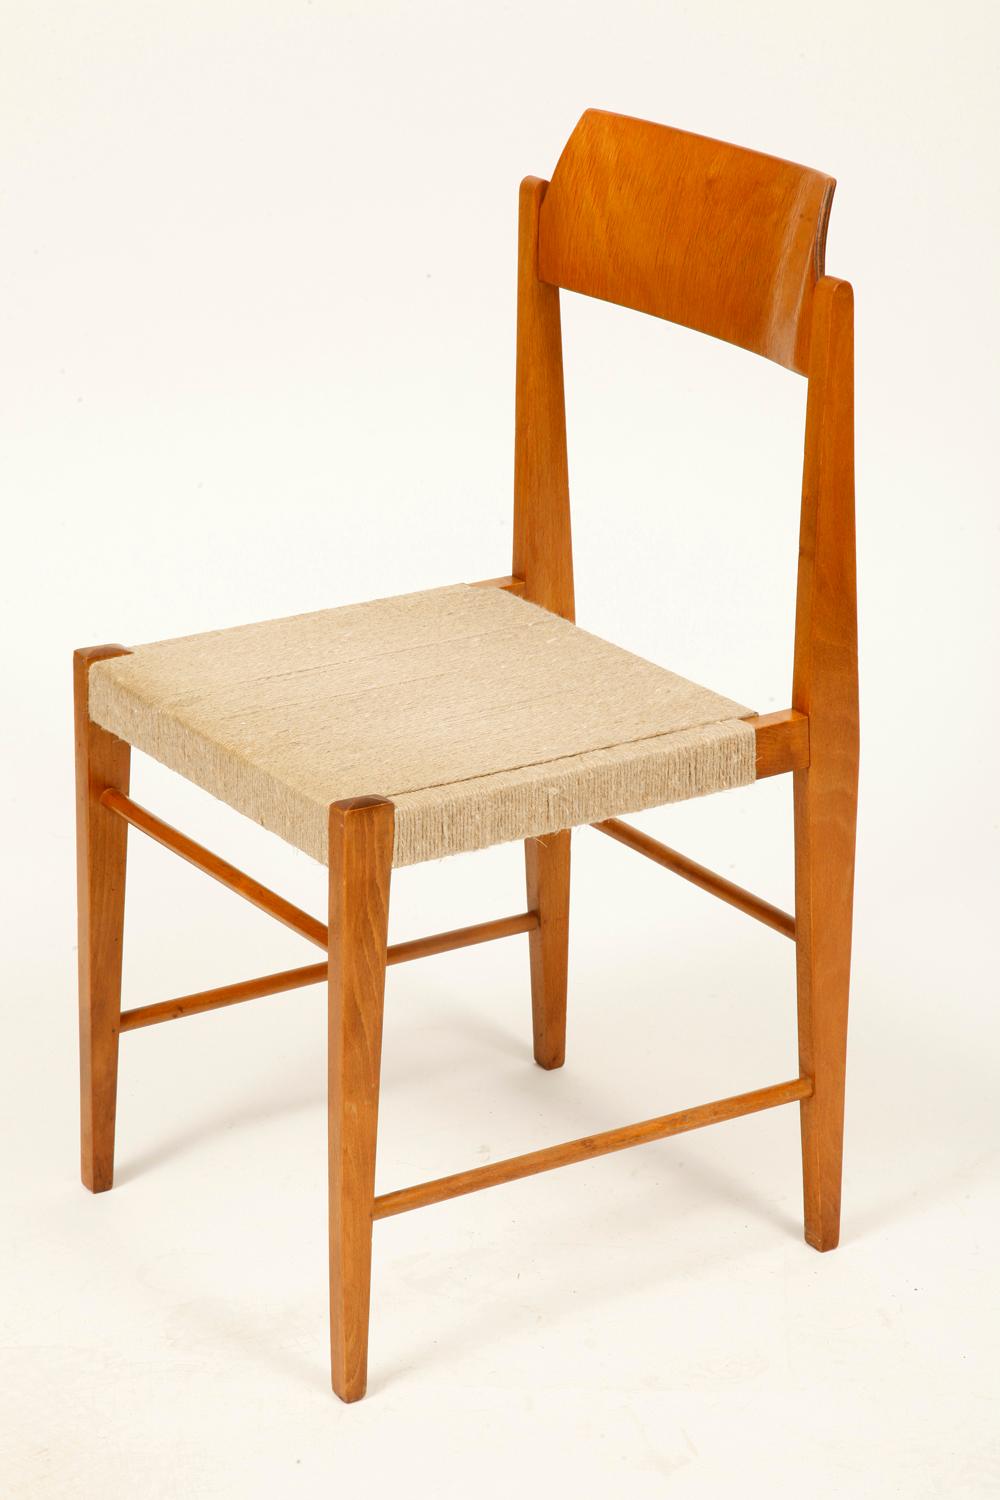 Excellent chairs designed in the 1960s by Ms. Irena Zmudzinska for the 